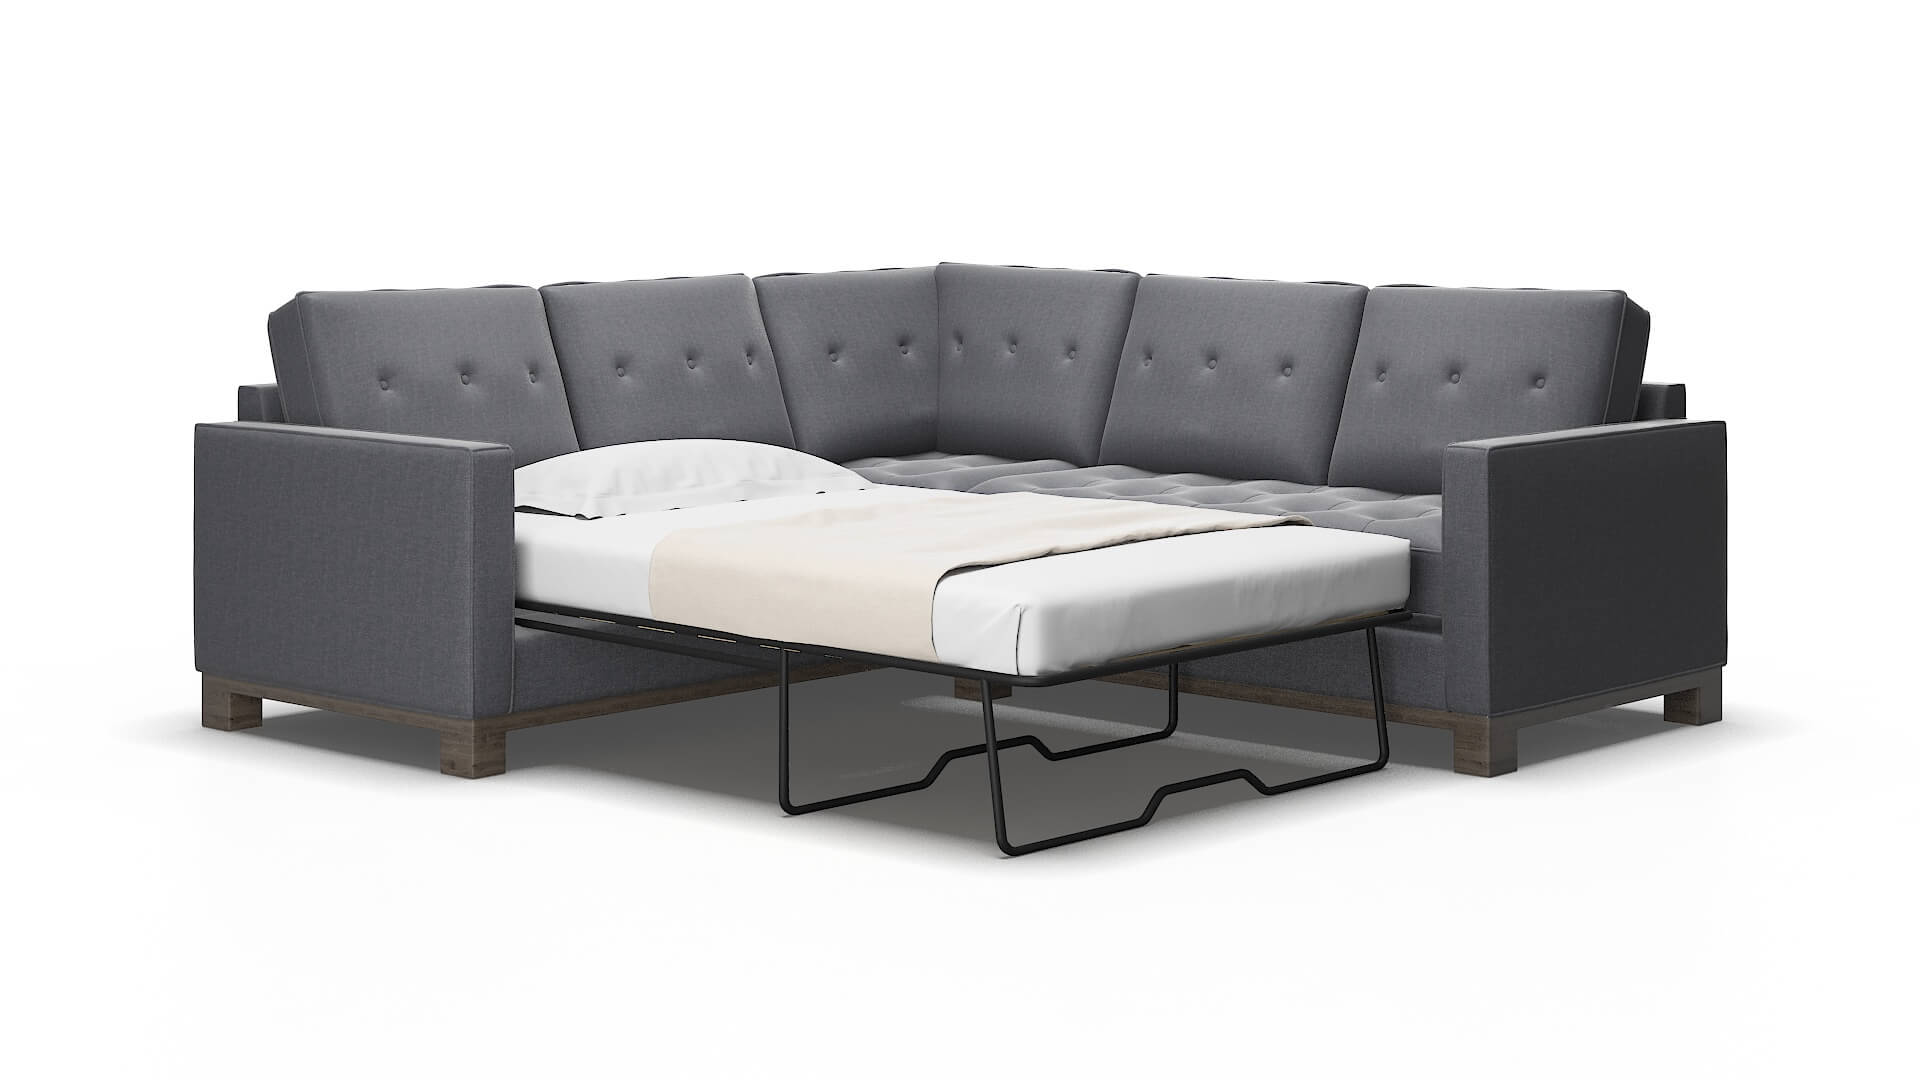 Syros Notion Graphite Sectional Sleeper 2